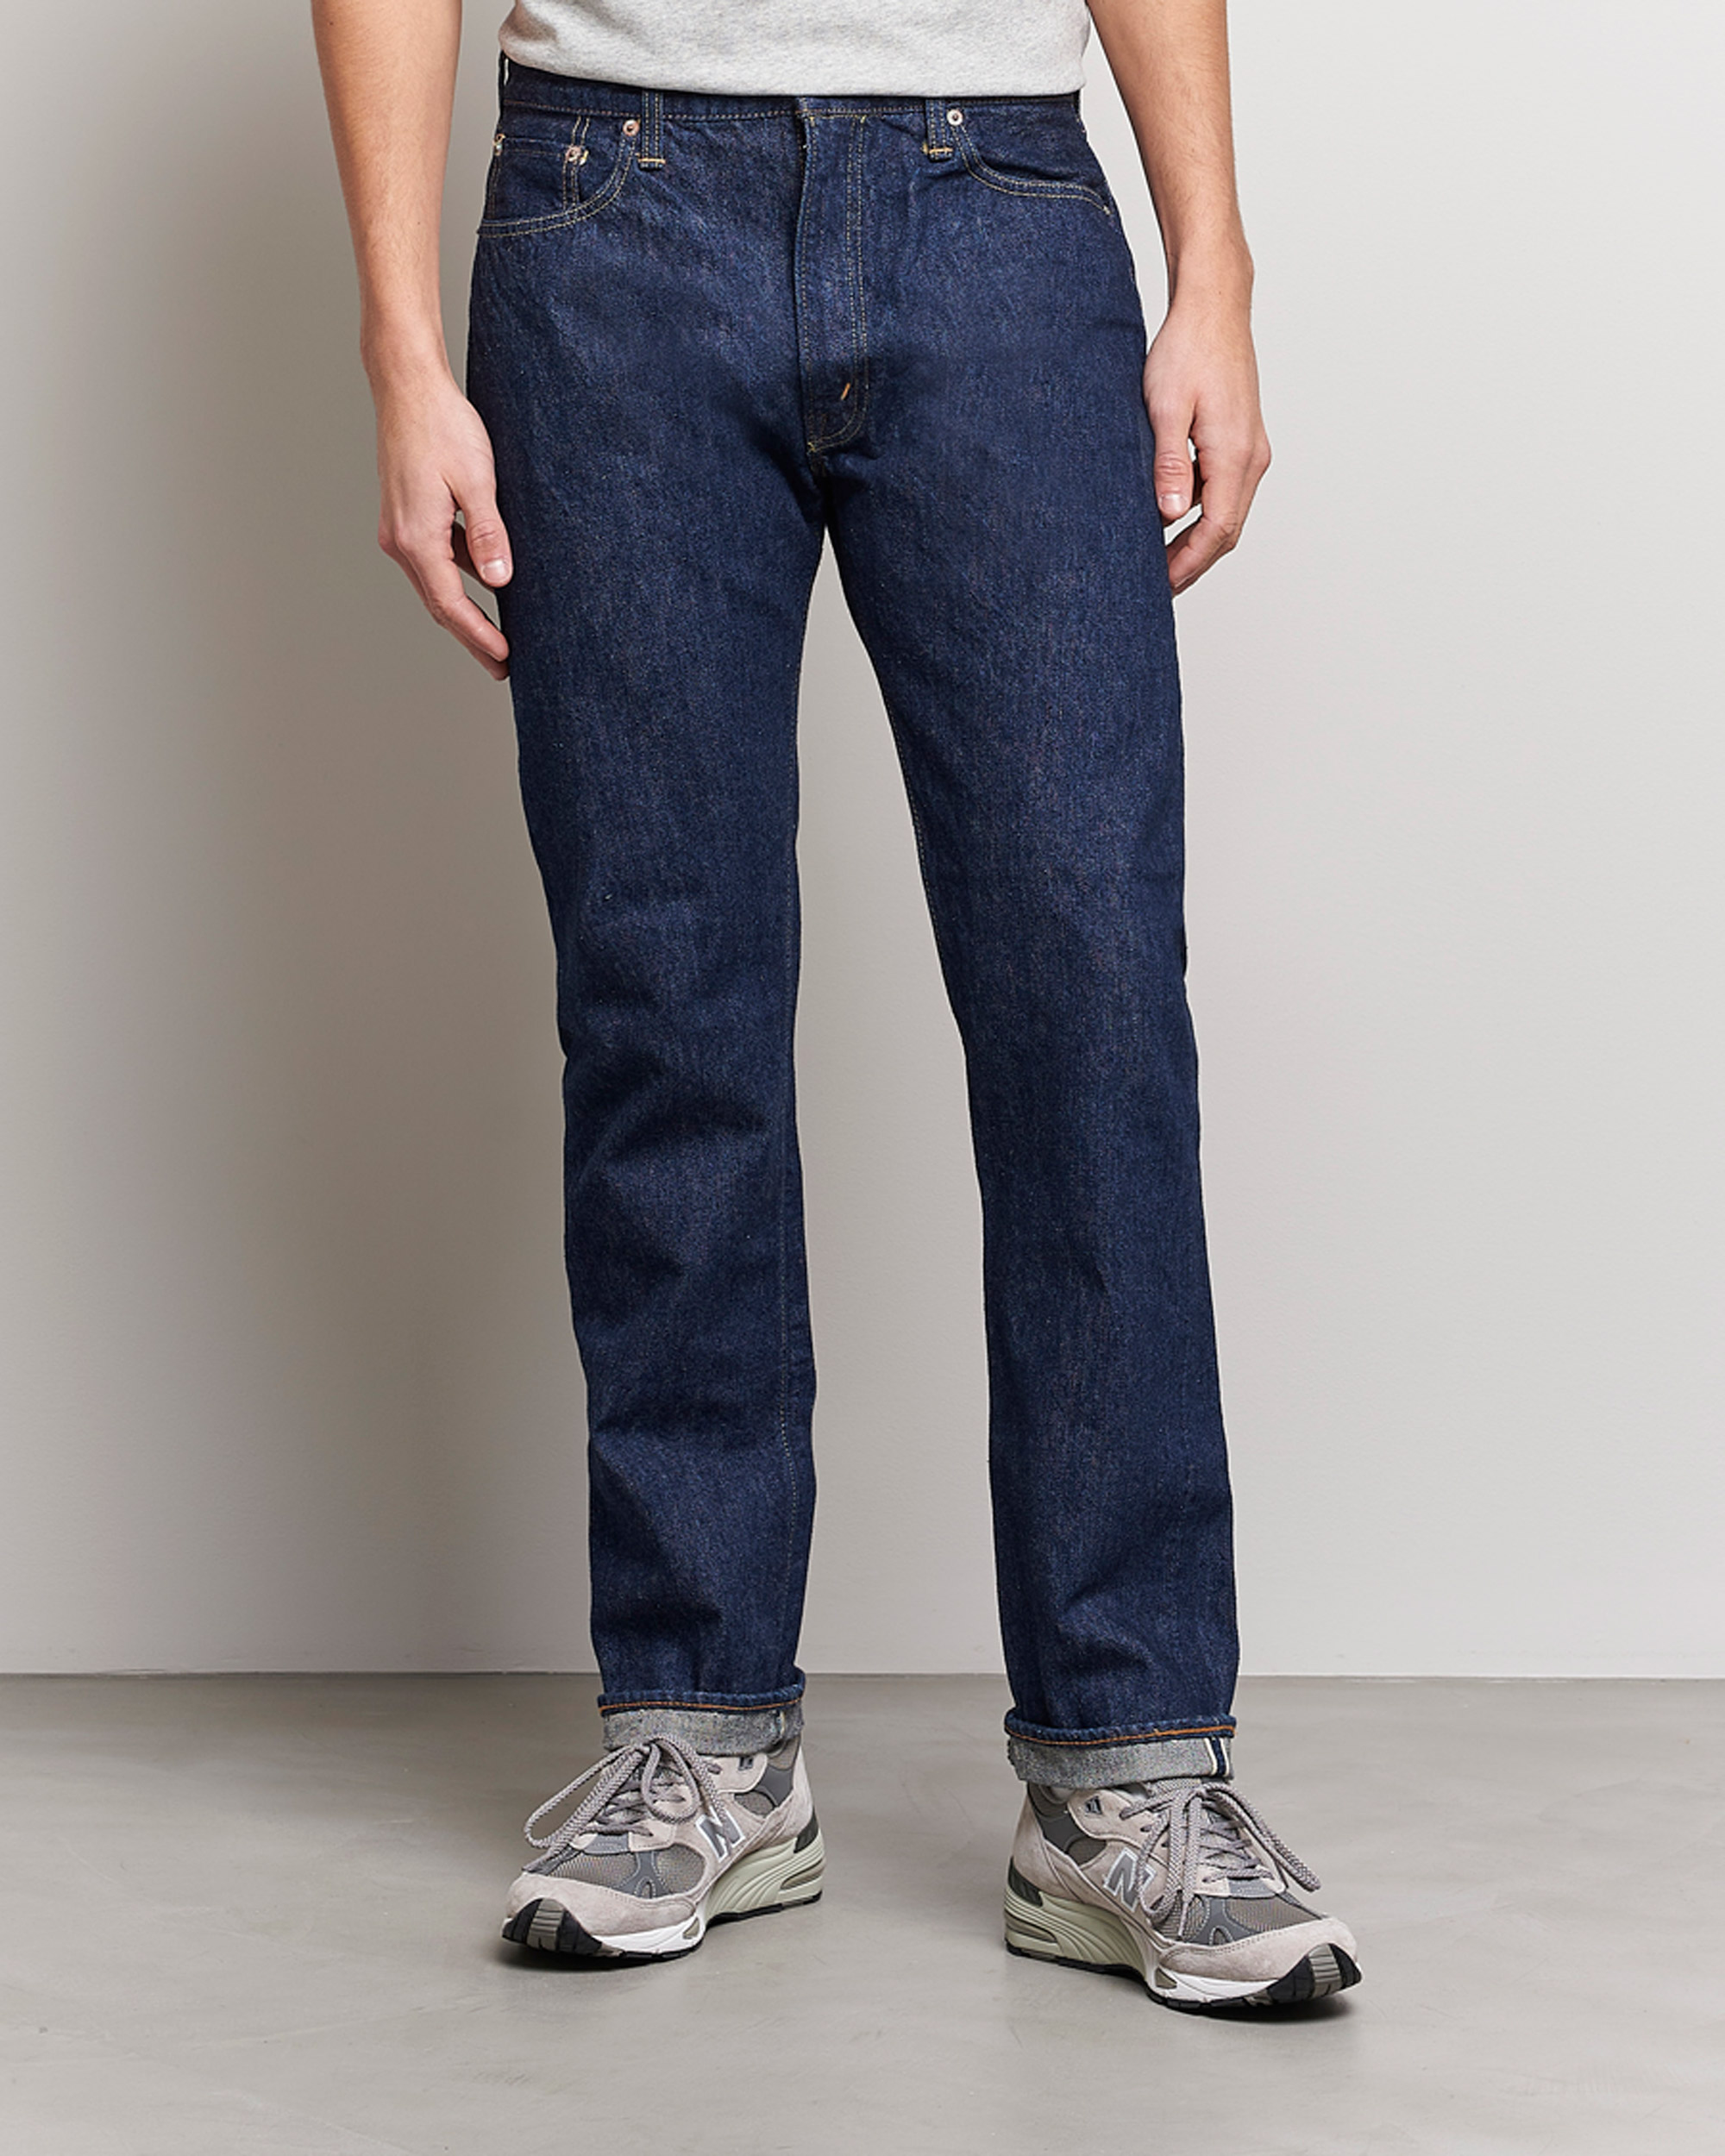 Hombres | Vaqueros | orSlow | Tapered Fit 107 Selvedge Jeans One Wash